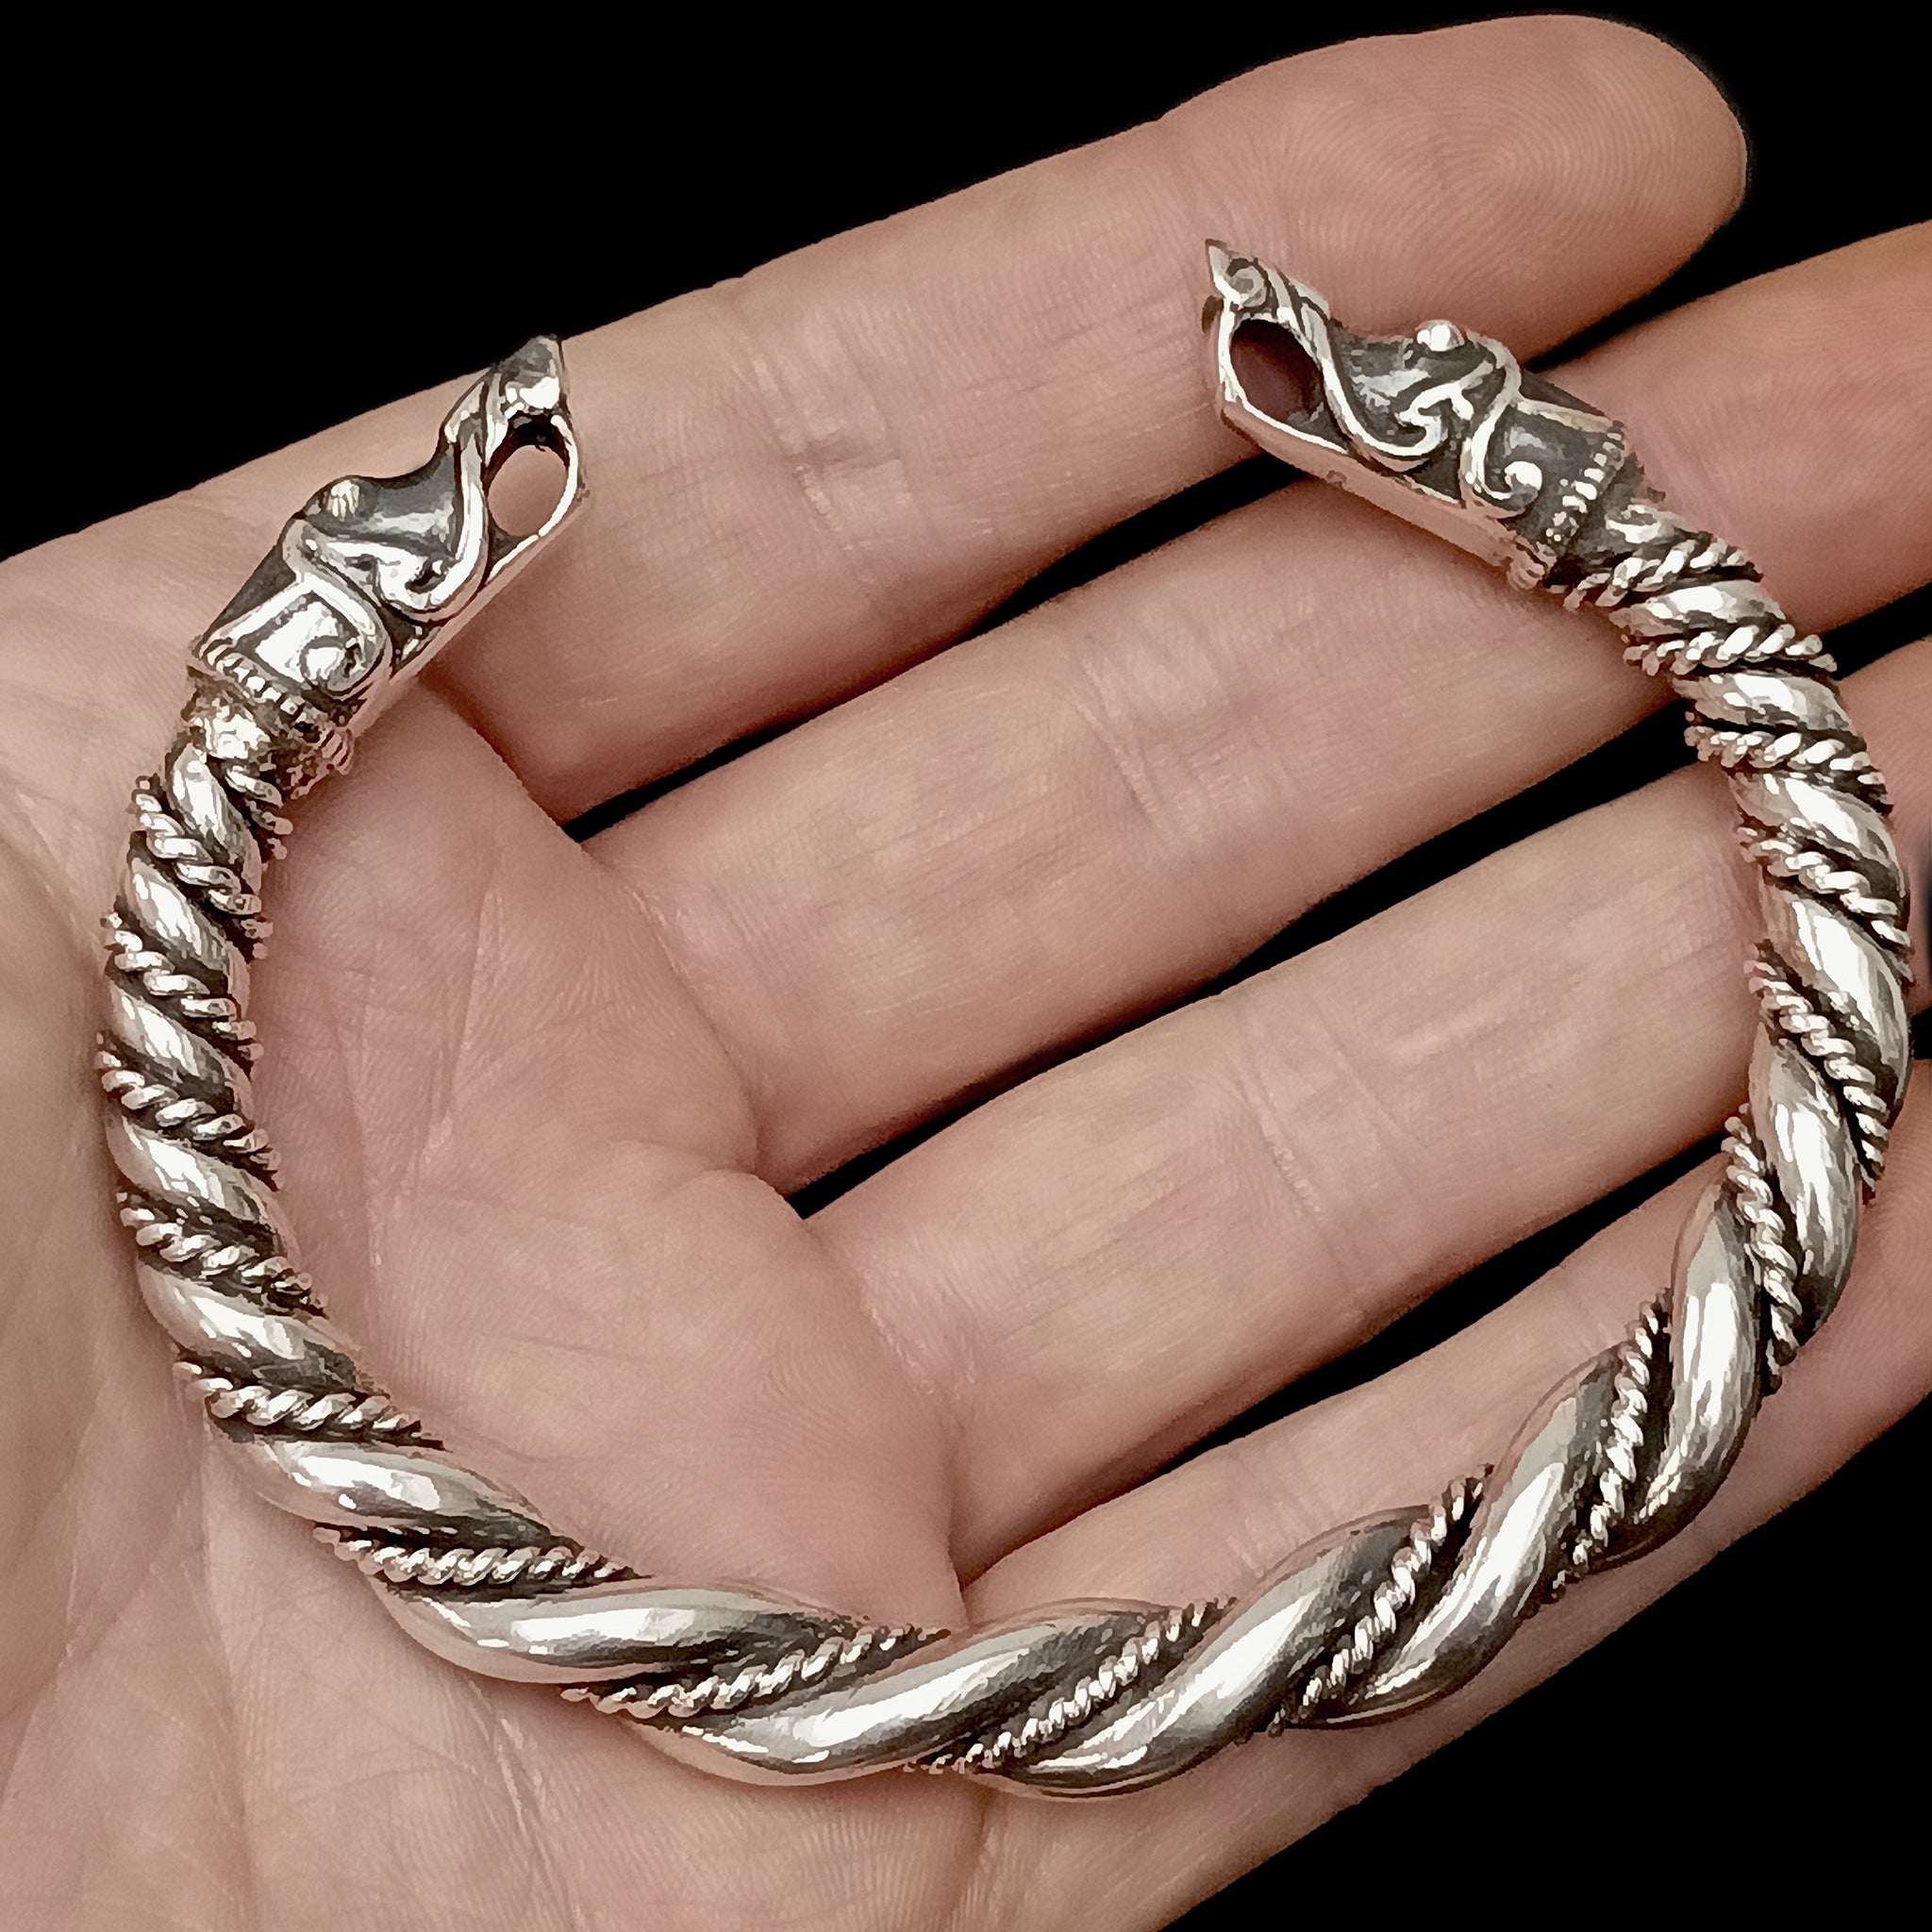 Thick Twisted Silver Arm Ring With Gotlandic Dragon Heads on Hand